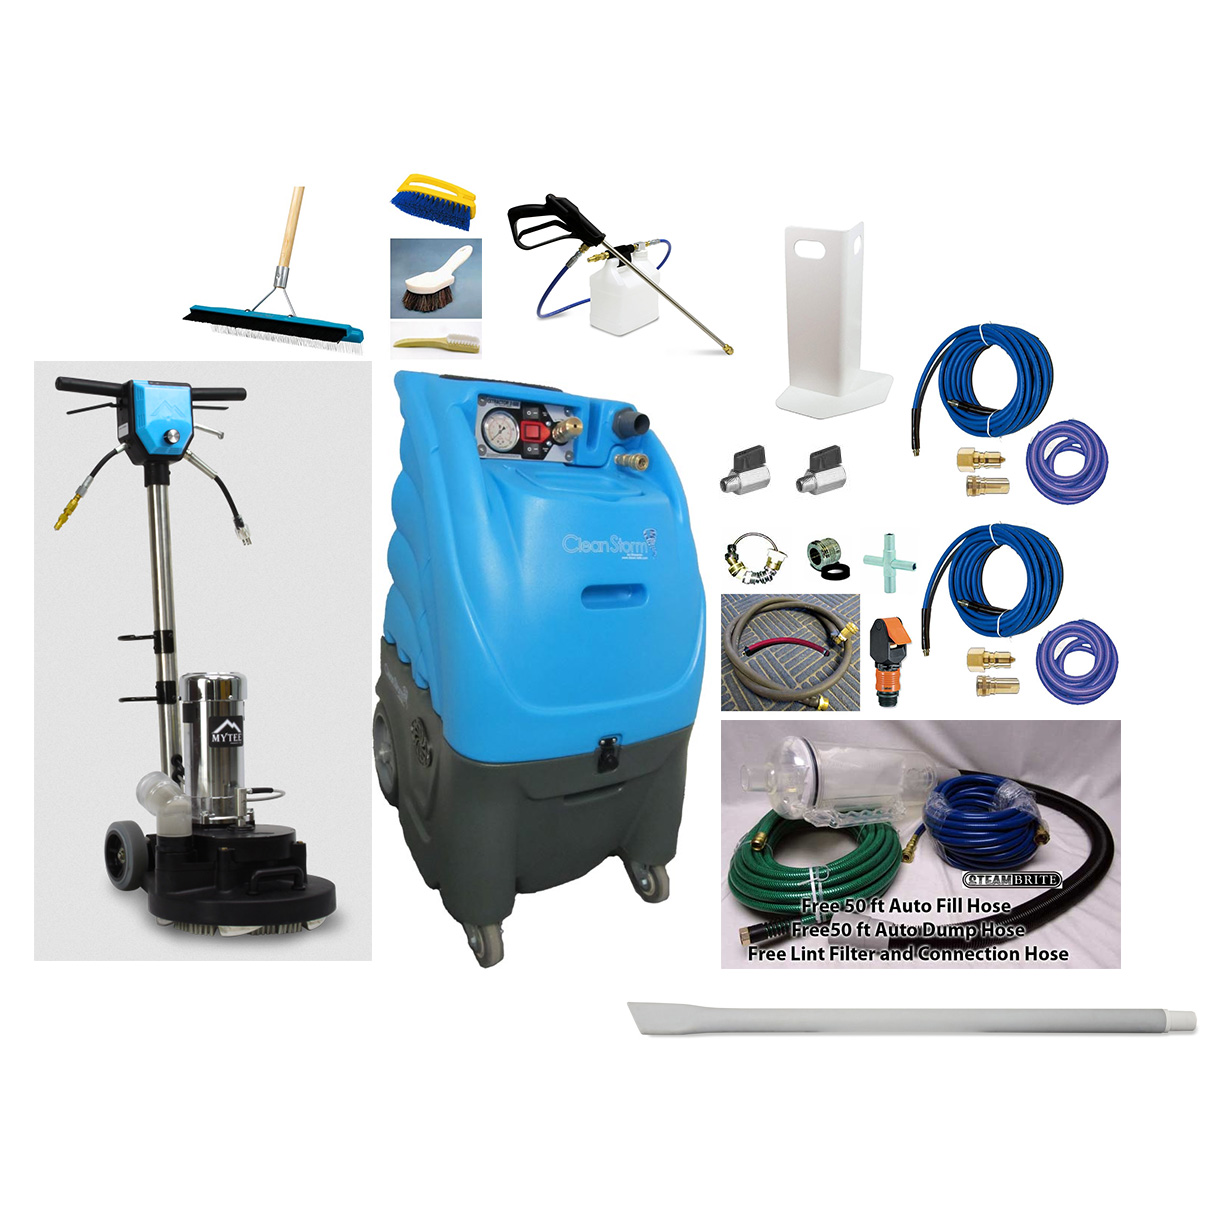 Trex and Clean Storm 12gal 500psi Dual 6.6 Vacs Auto Fill 20gpm Auto Dump Carpet Cleaning Starter Package 12-6500-AFAD 20220715